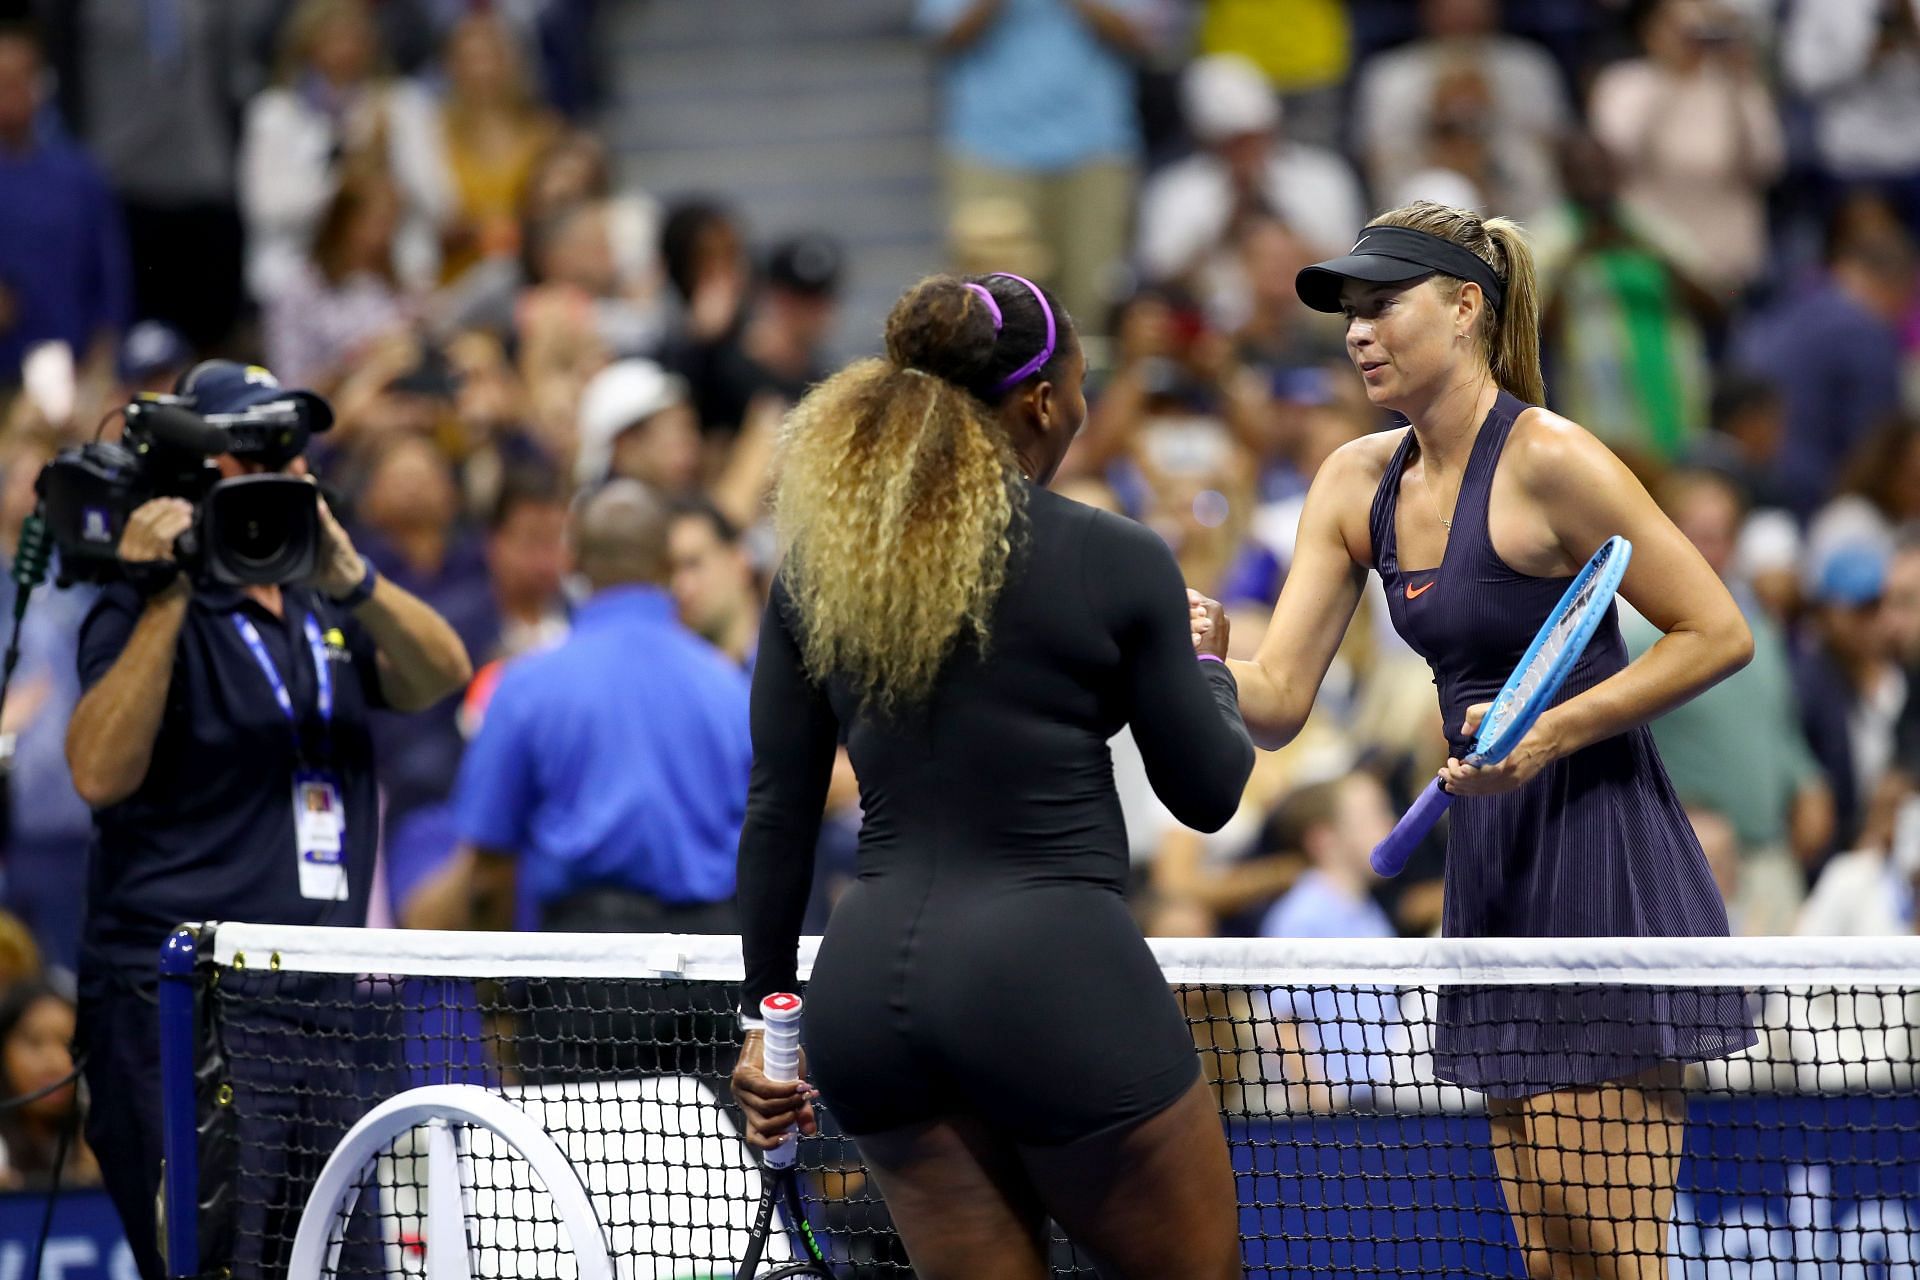 Serena Williams and Maria Sharapova after their match at the 2019 US Open